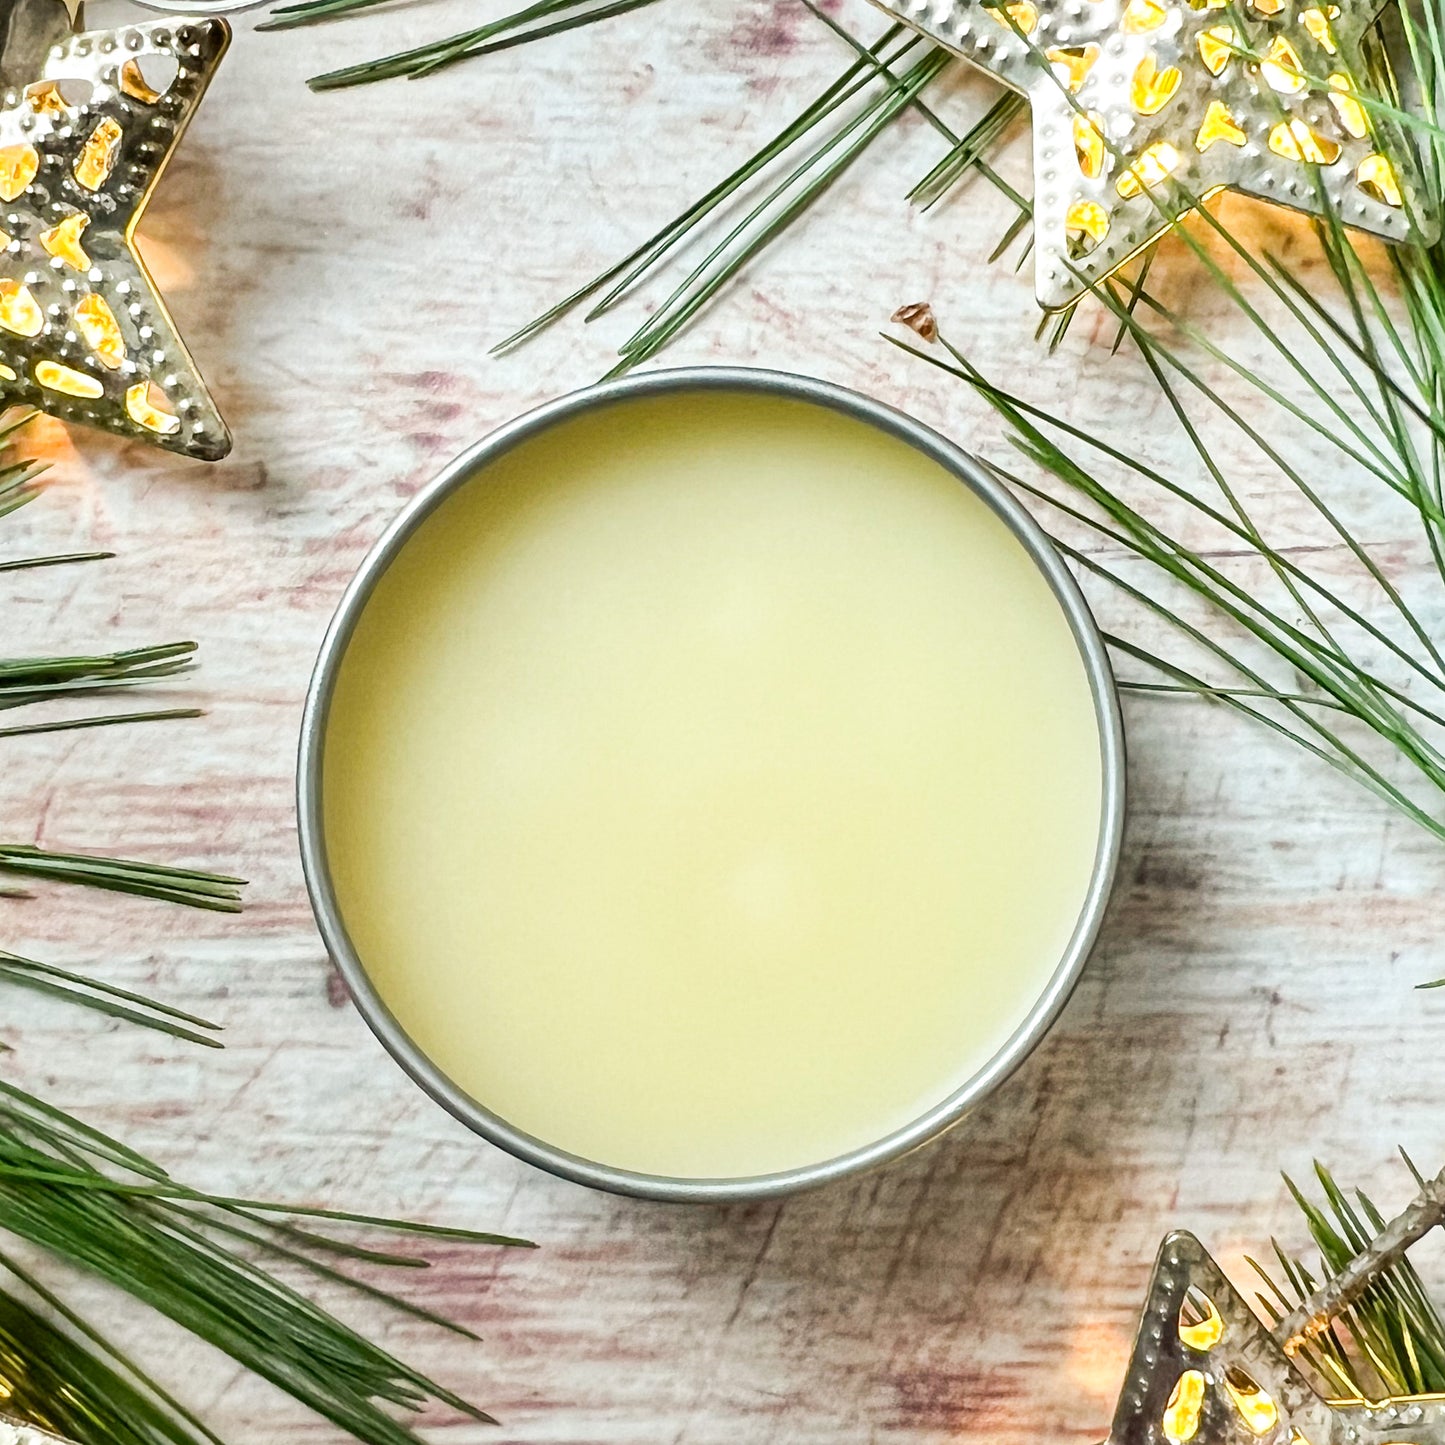 Balm - WinterSoft Hand Balm - Winter Balm for Dry Chapped Skin - Moisturizing Hand Balm - with Argan Oil, Carrot Seed, Frankincense, and Rose Geranium Essential Oils